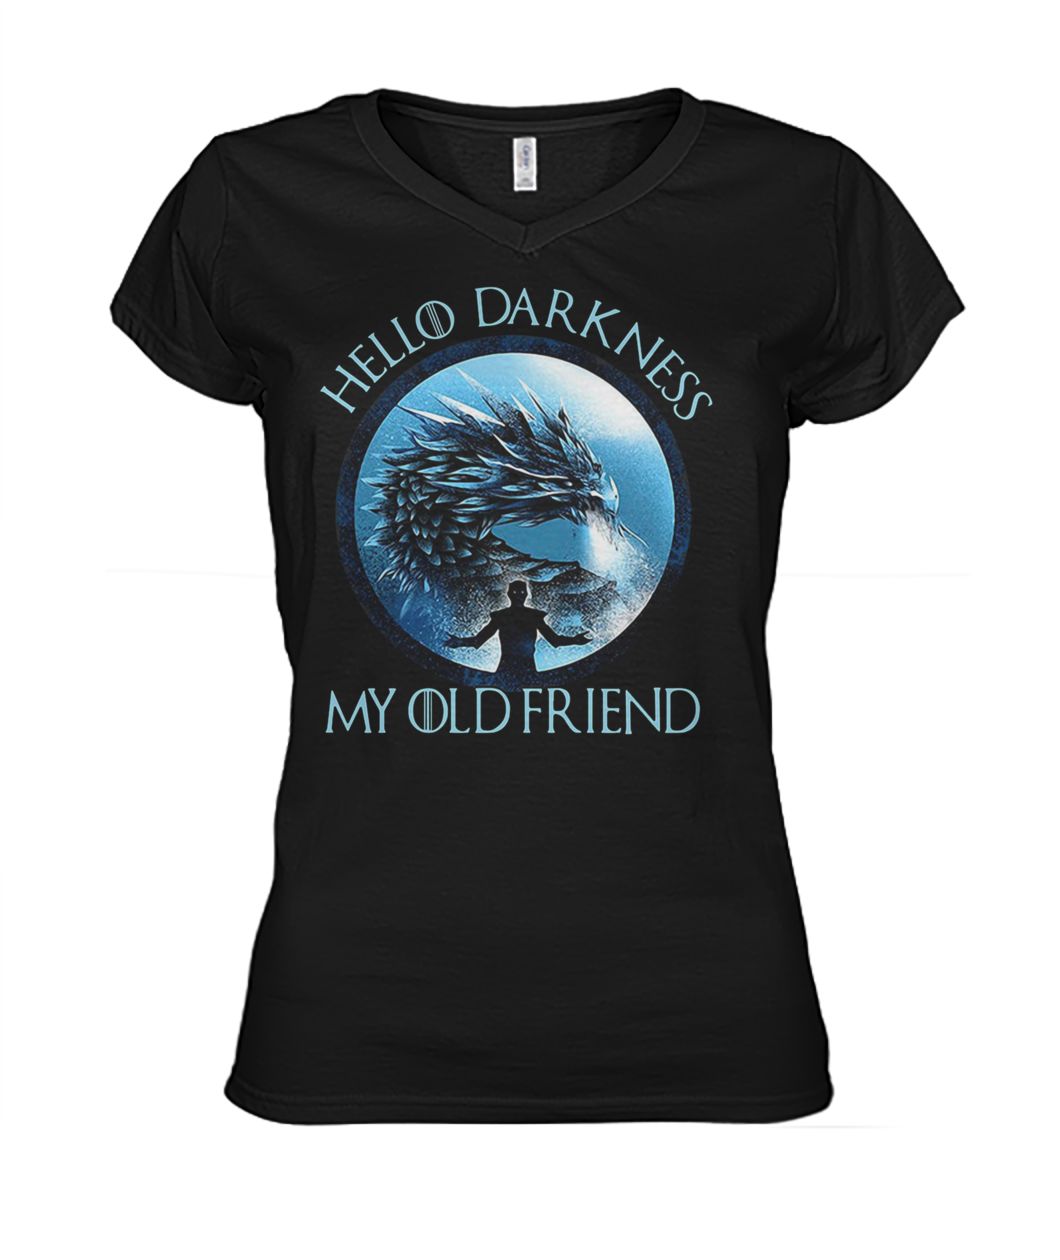 Game of thrones white walker the night king hello darkness my old friend women's v-neck